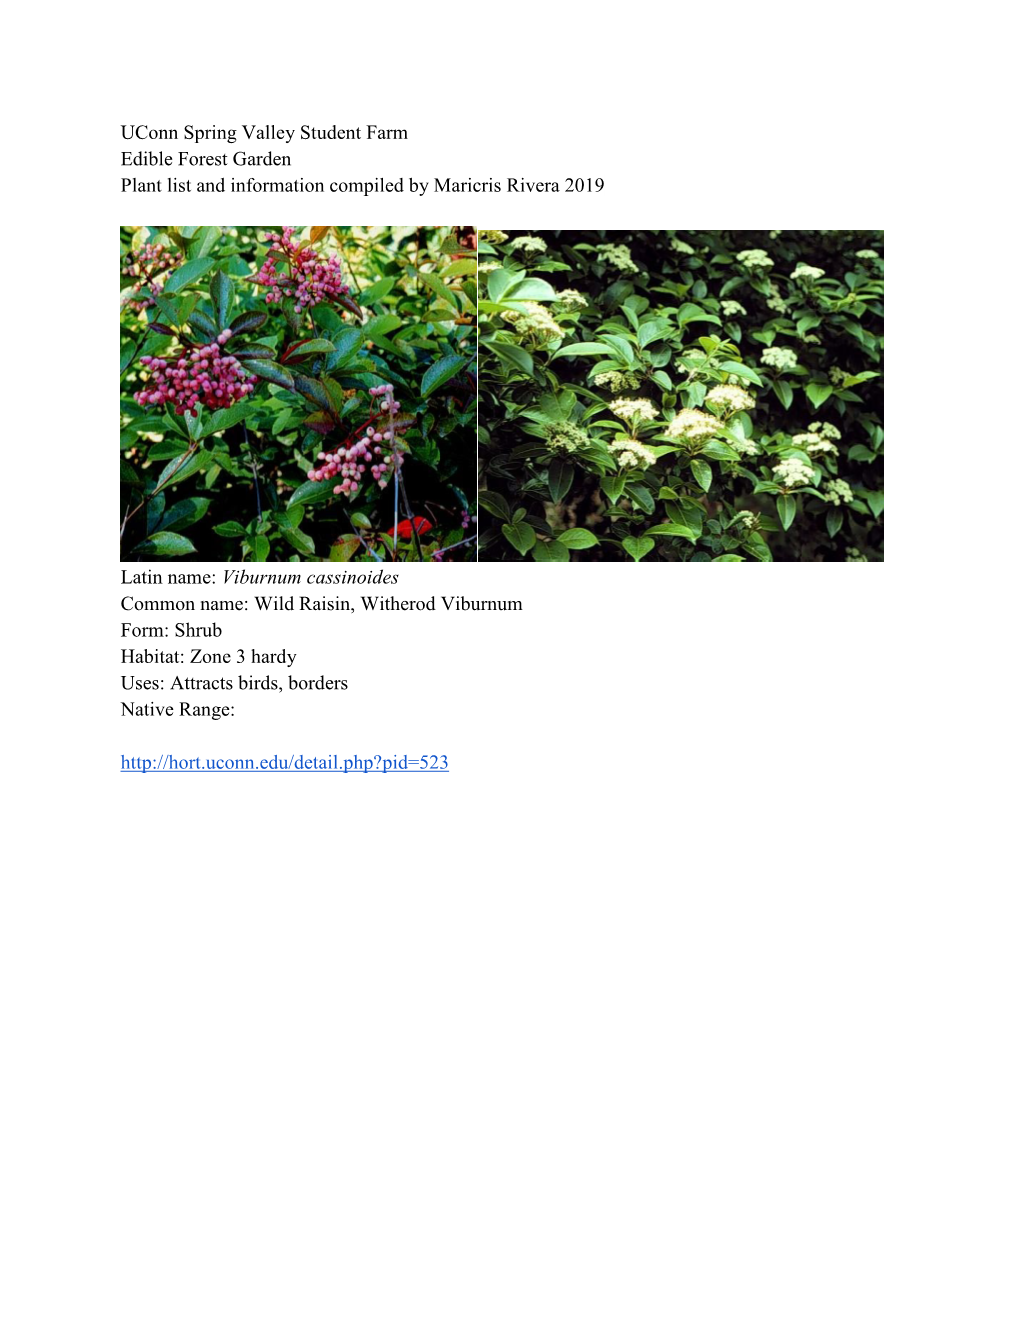 Edible Forest Plant Information .Pdf